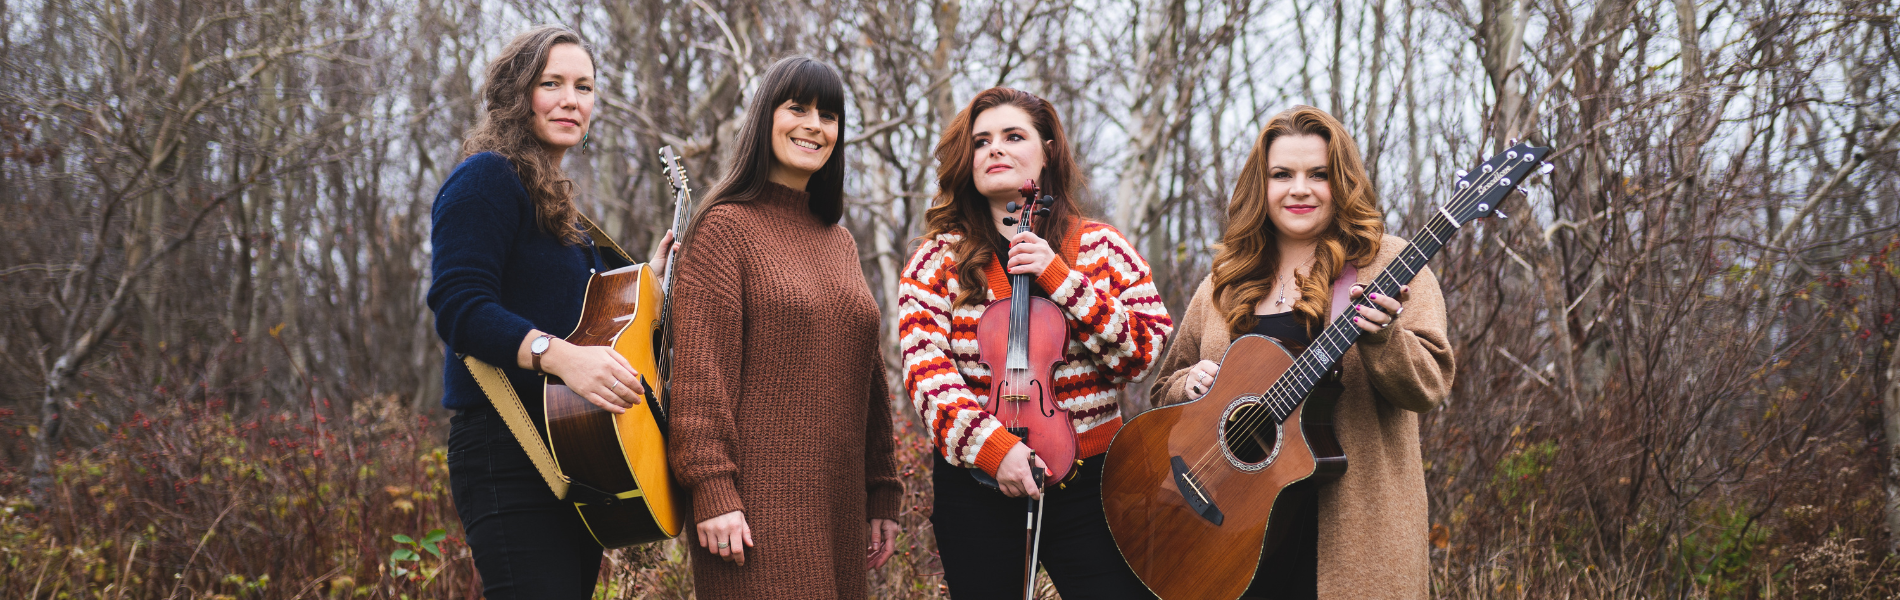 Four women holding instruments, standing together in front of bare trees